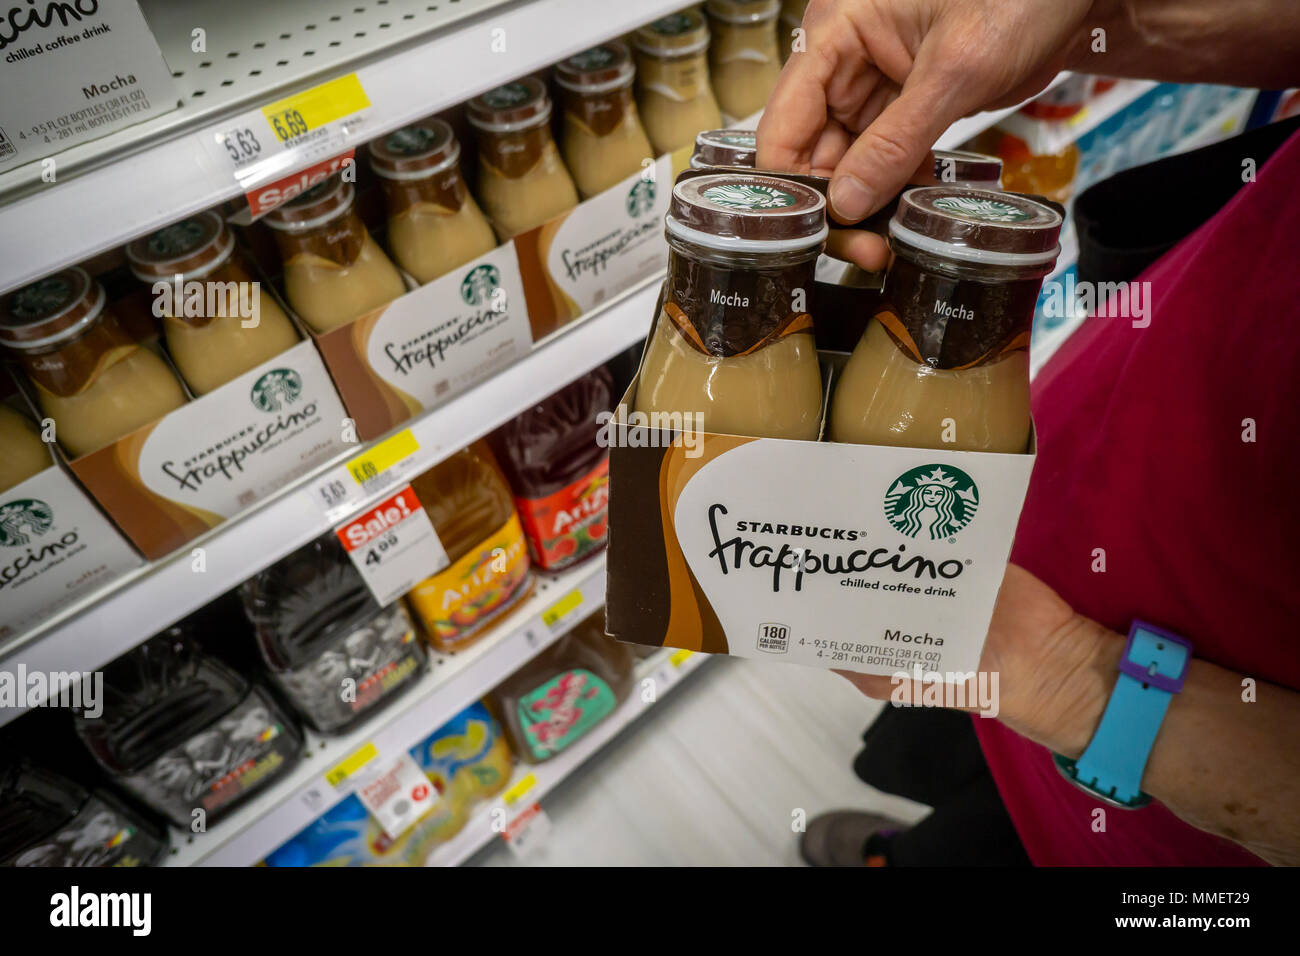 A shopper chooses Starbucks Frappuccino coffee in a supermarket in New York on Friday, May 4, 2018. NestlŽ is reported to be in talks to purchase Starbucks' grocery business. The units that sell beans and drinks in supermarkets and groceries are involved and not any of the stores. NestlŽ is the world's largest packaged food company. (© Richard B. Levine) Stock Photo